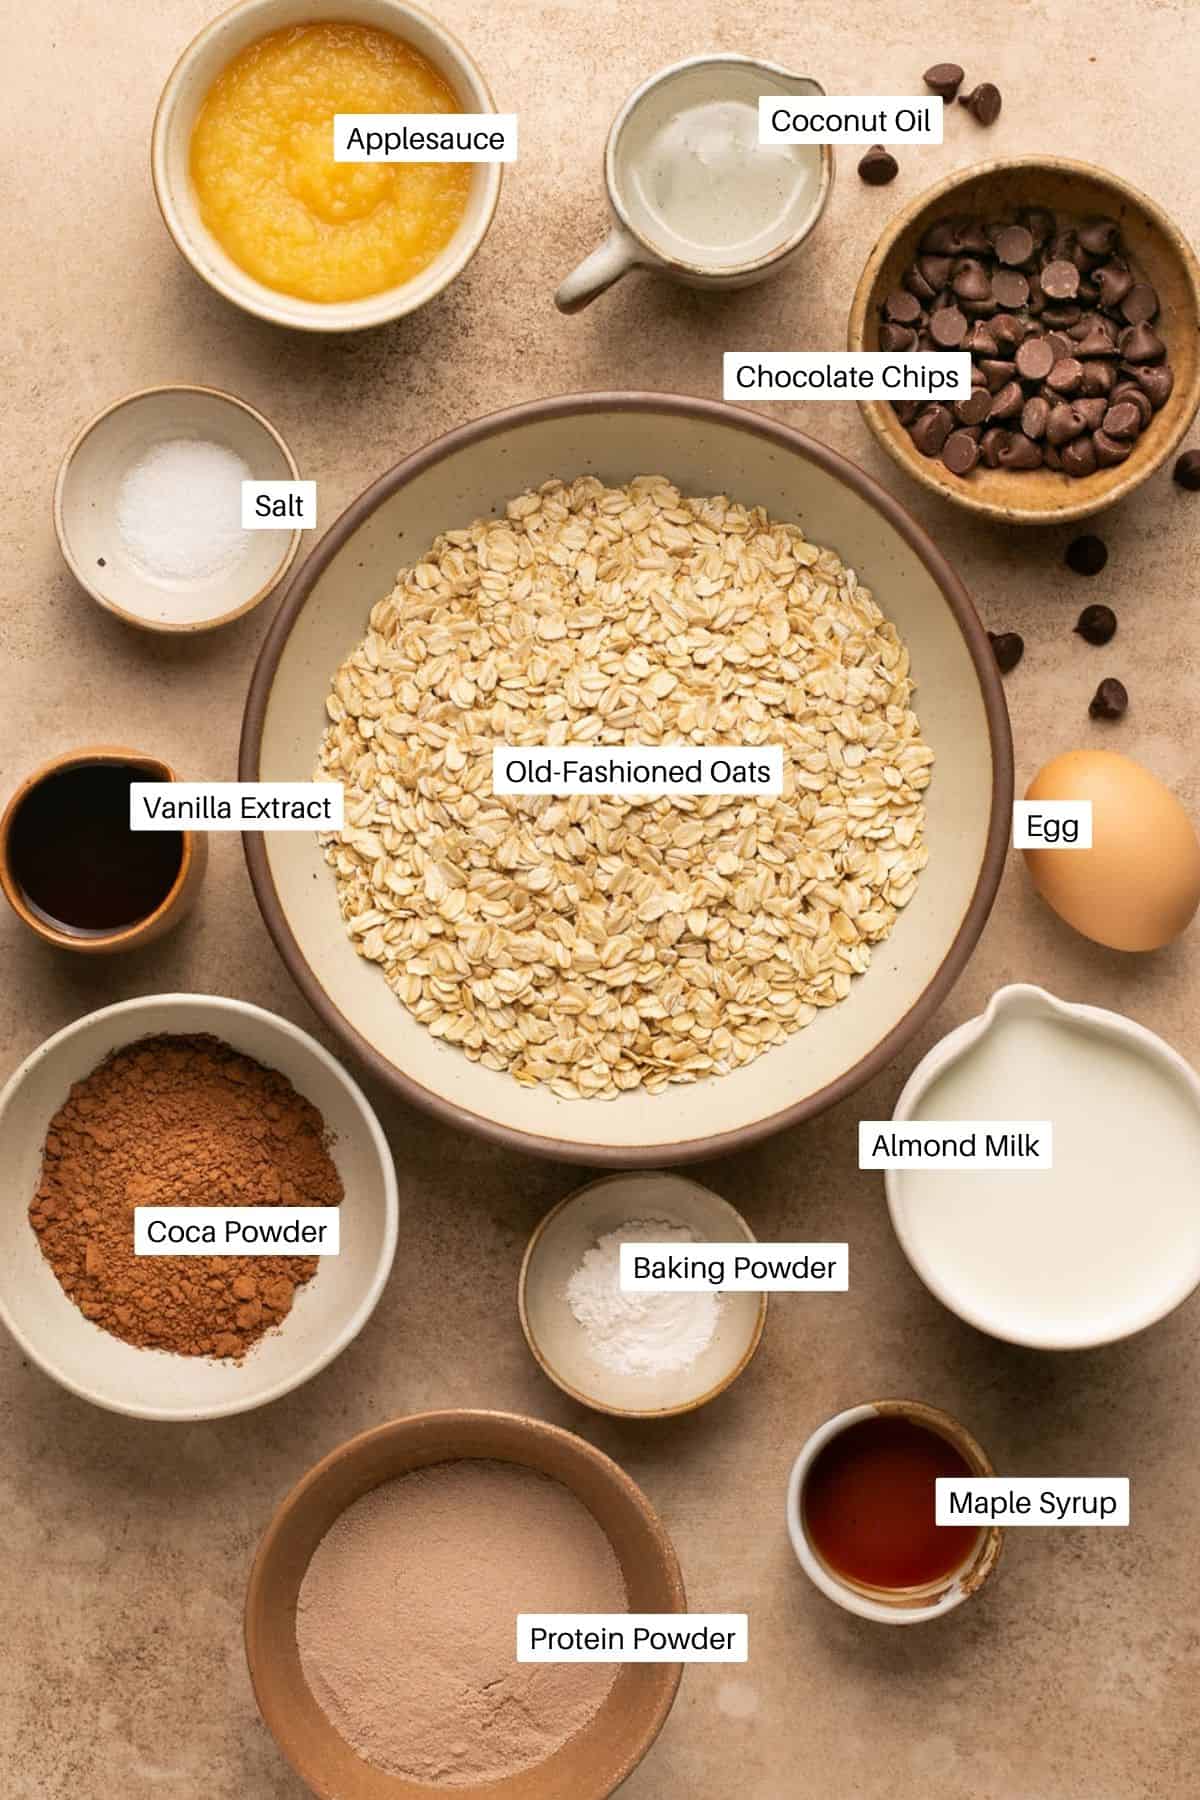 Ingredients for baked oats laid out. 